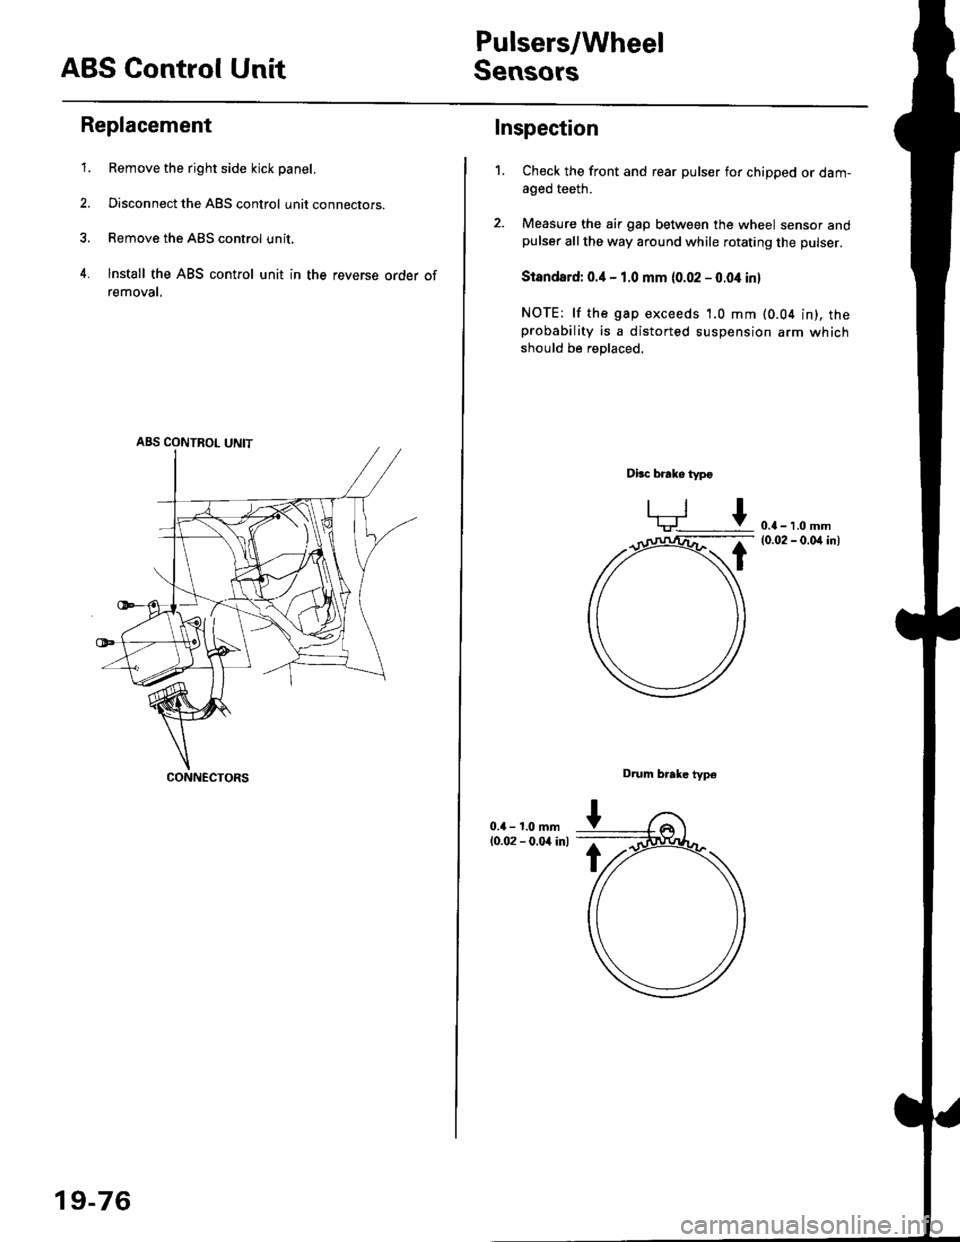 HONDA CIVIC 1996 6.G User Guide ABS Control Unit
Pulsers/Wheel
Sensors
Replacement
1. Remove the right side kick panel.
2. Disconnect the ABS control unit connecrors.
3. Remove the ABS control unit,
4. lnstall the ABS control unit i